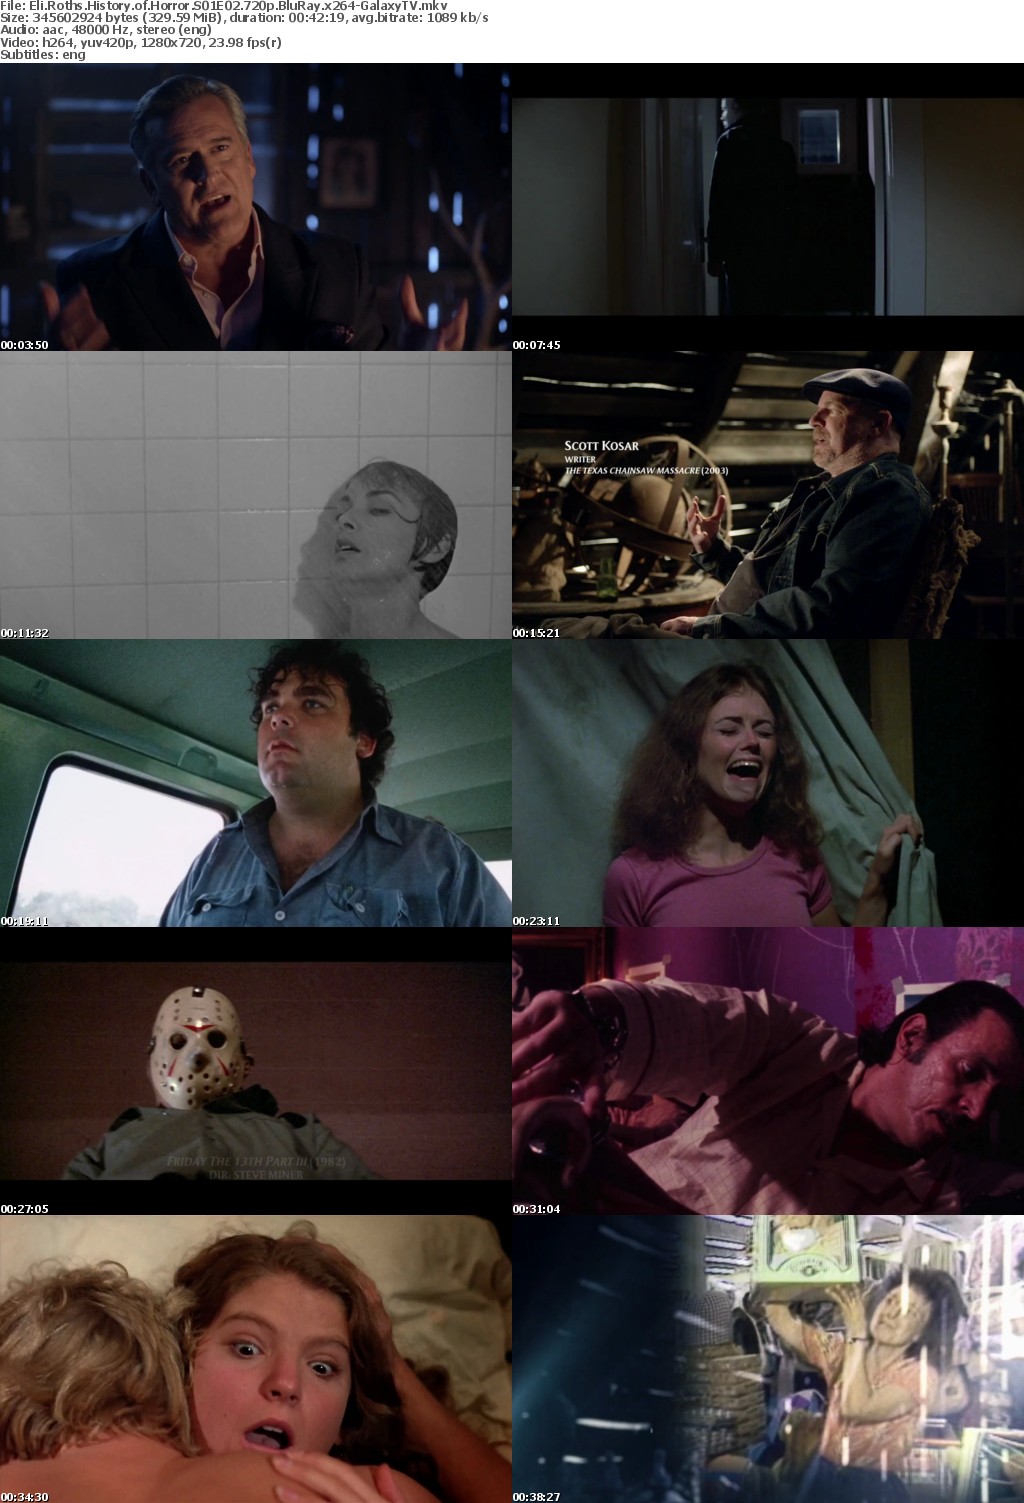 Eli Roths History of Horror S01 COMPLETE 720p BluRay x264-GalaxyTV